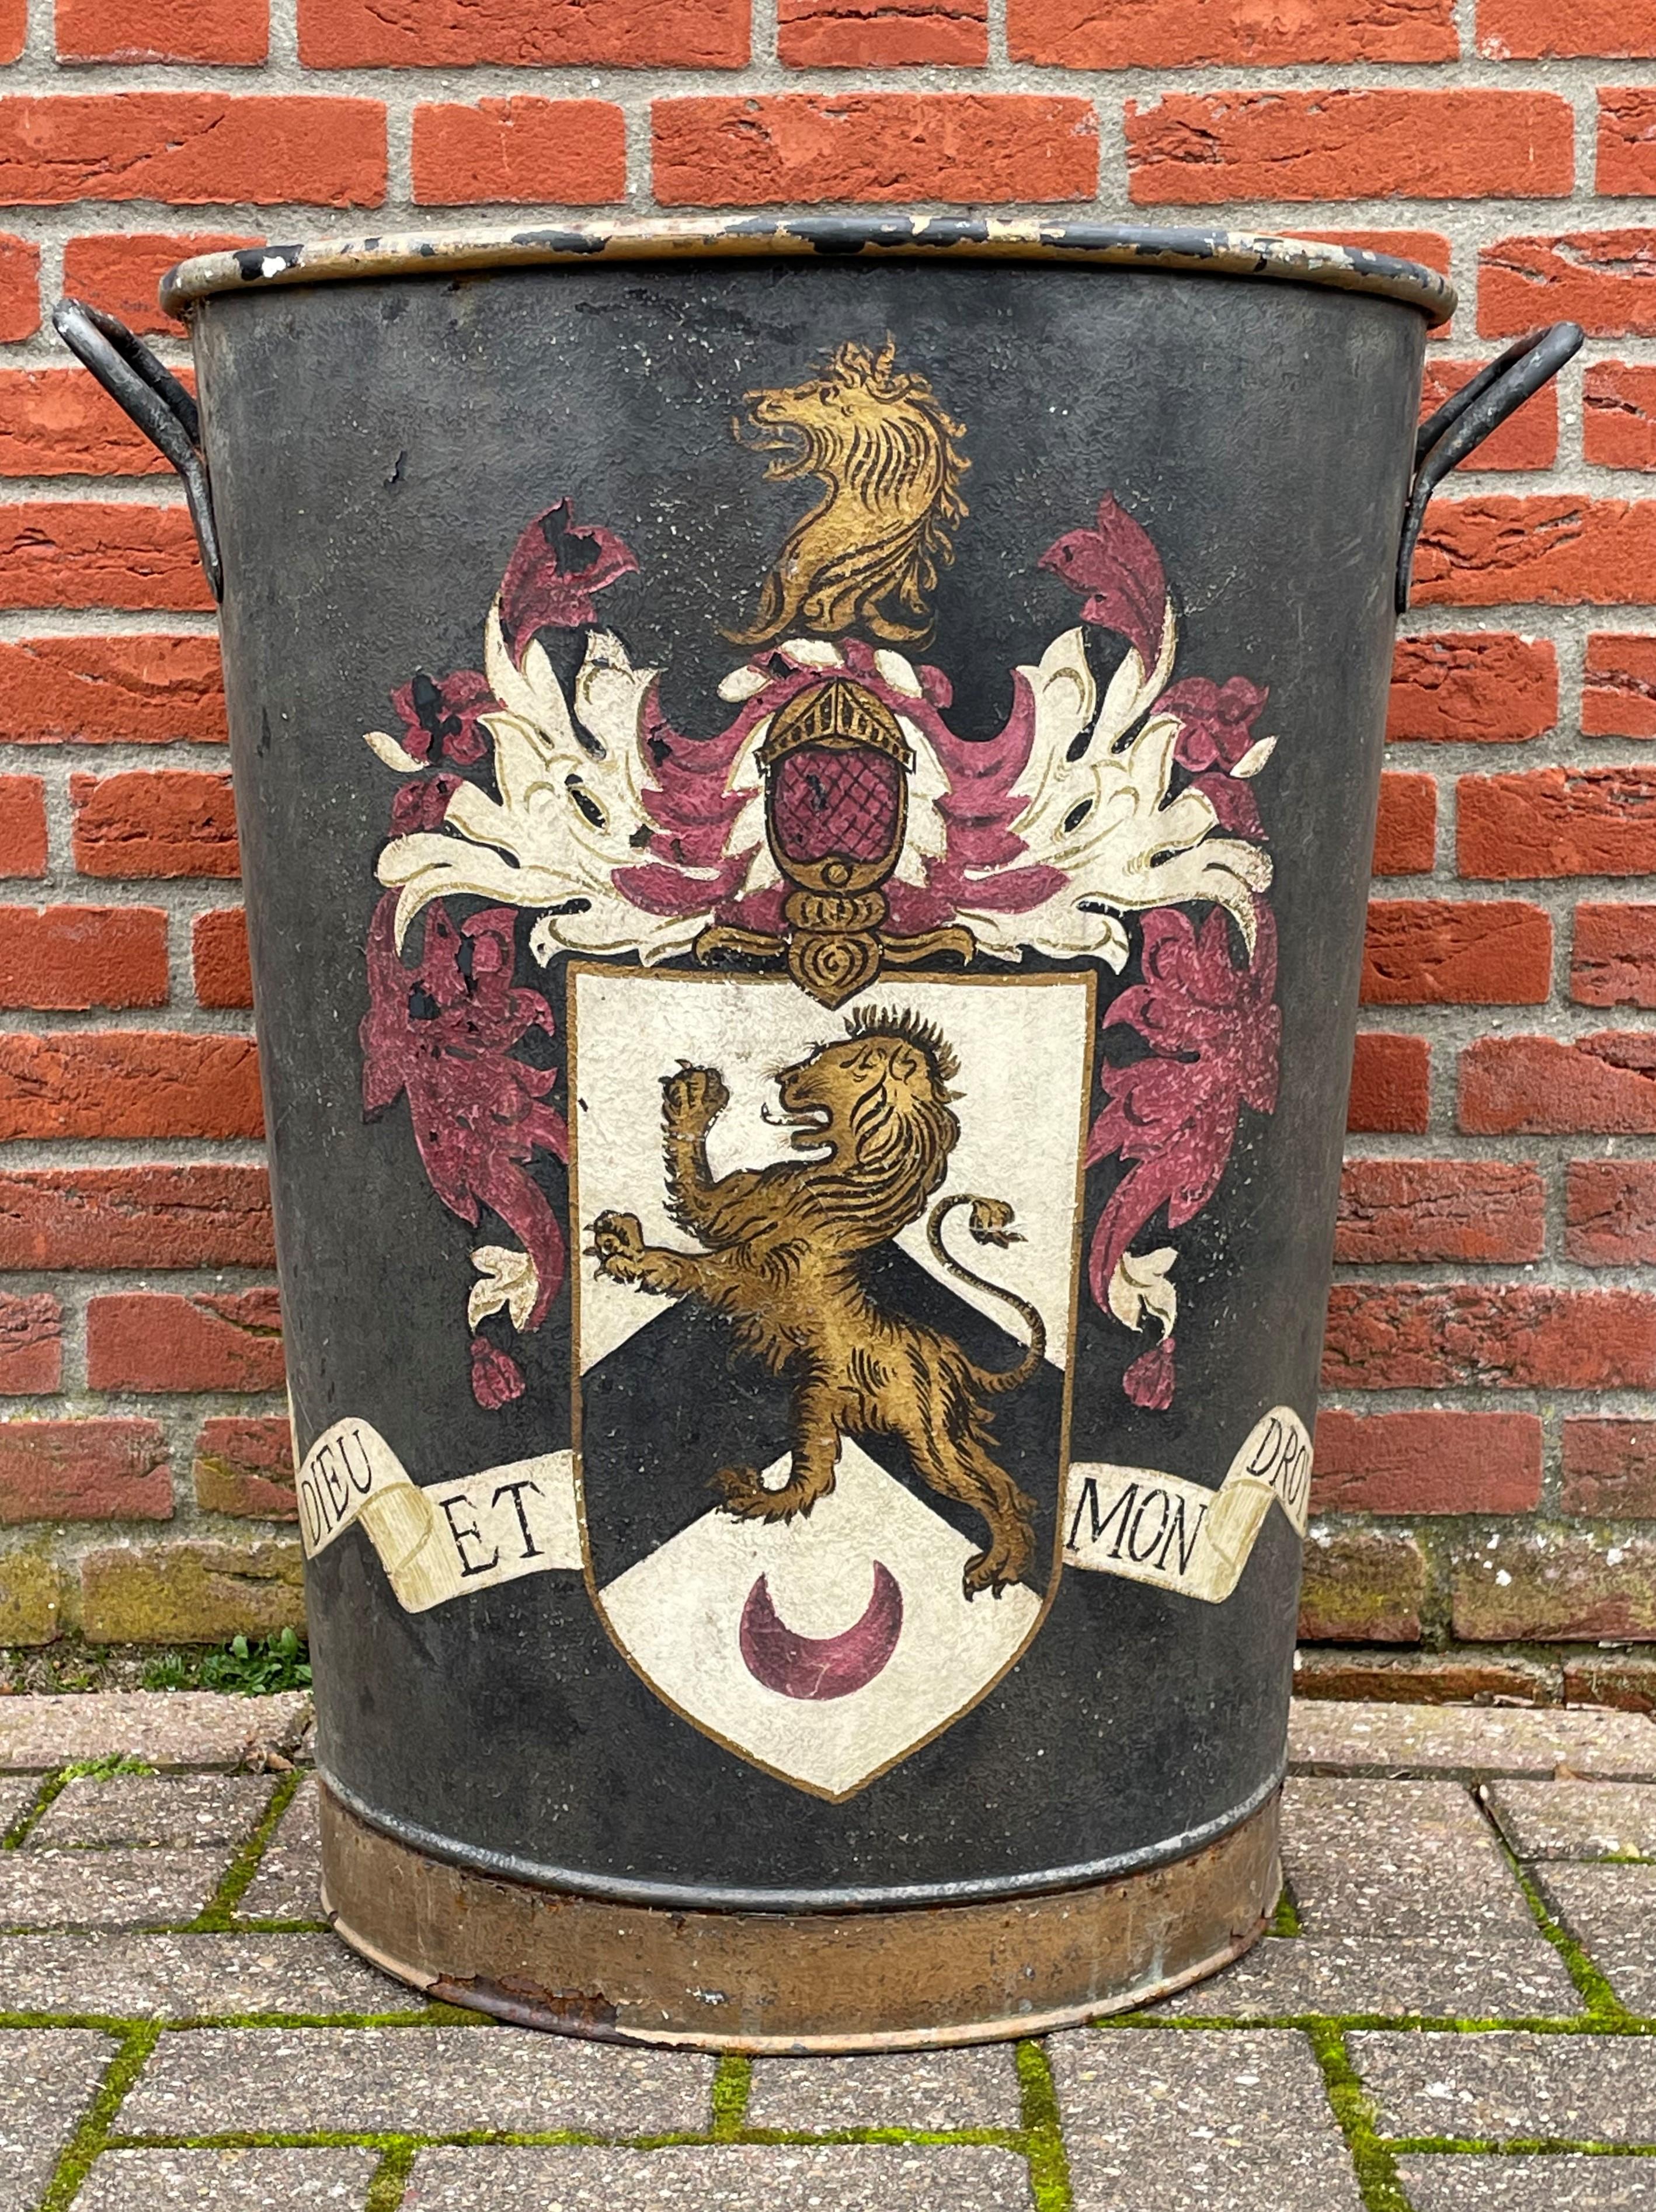 European Largest Antique Firewood Bucket / Planter with British Crest 'God and My Right'